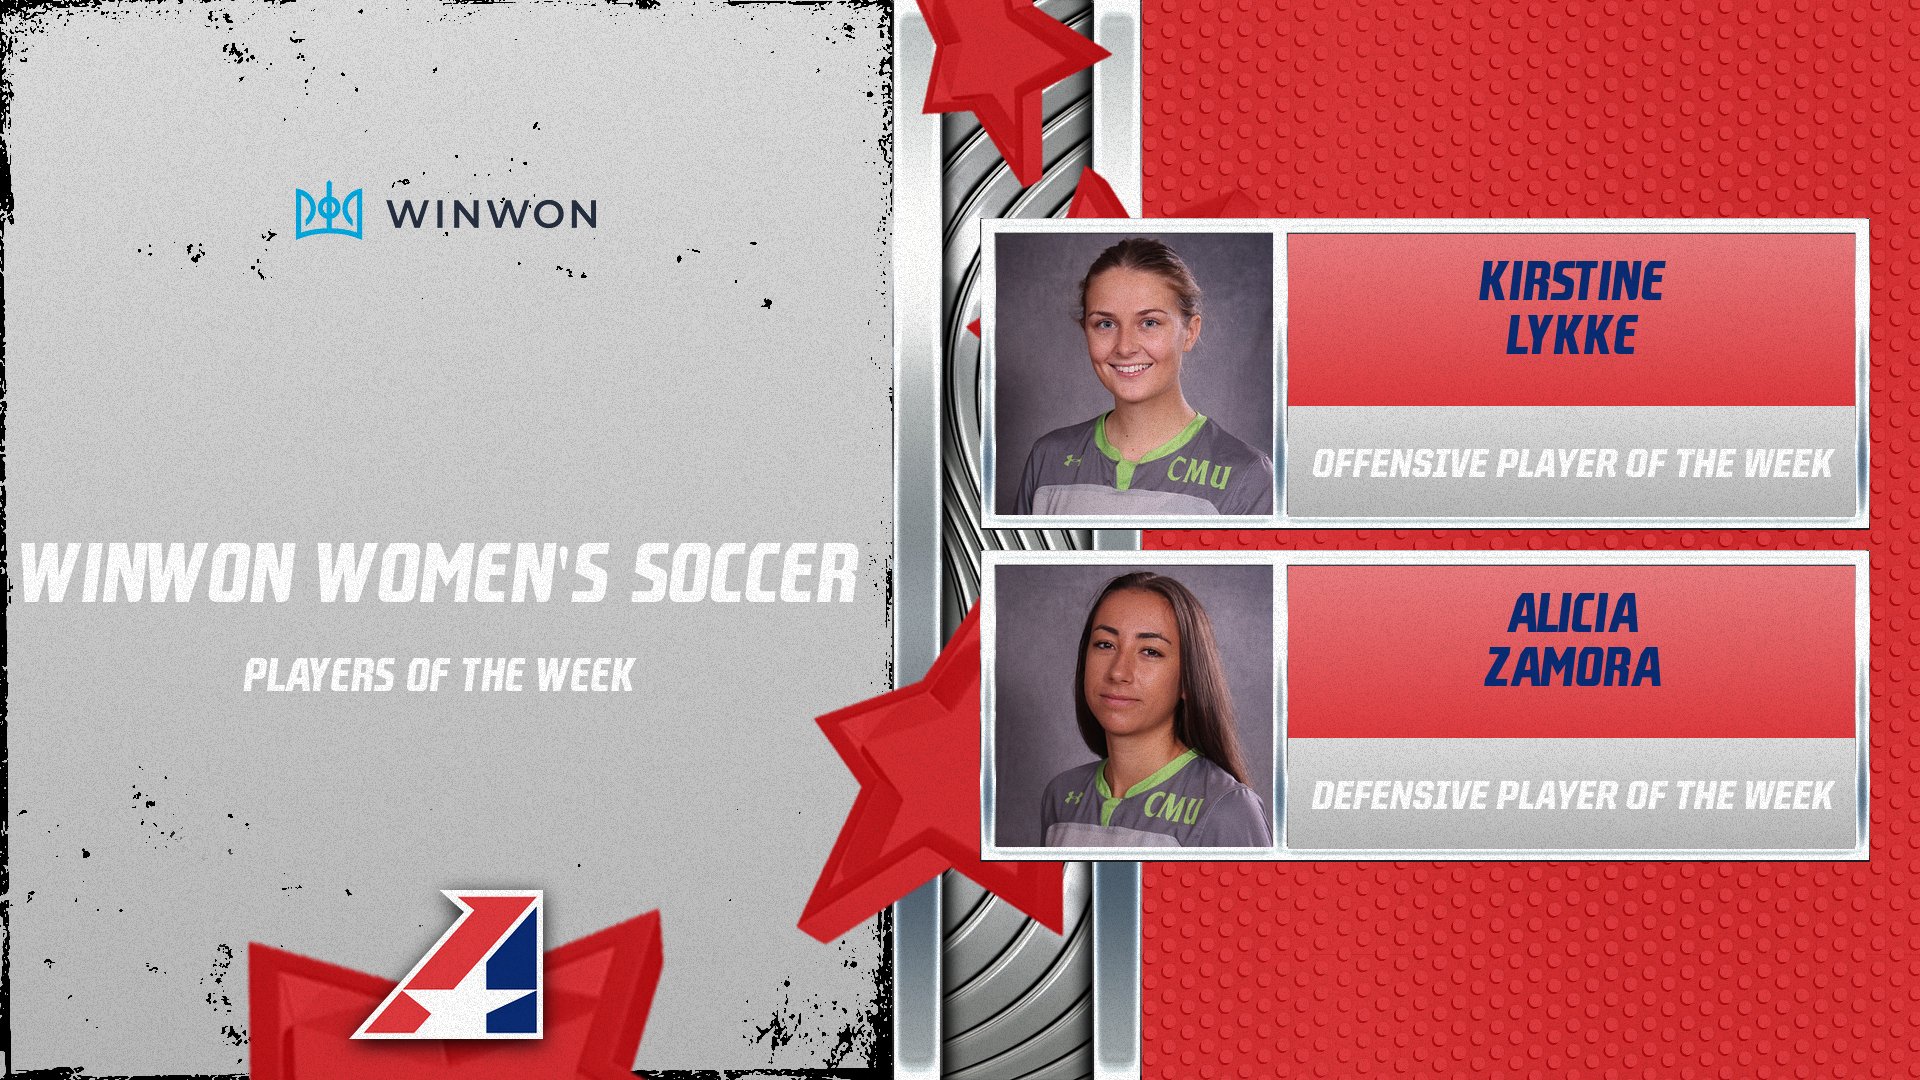 No. 9 Central Methodist Sweeps WinWon Women’s Soccer Players of the Week